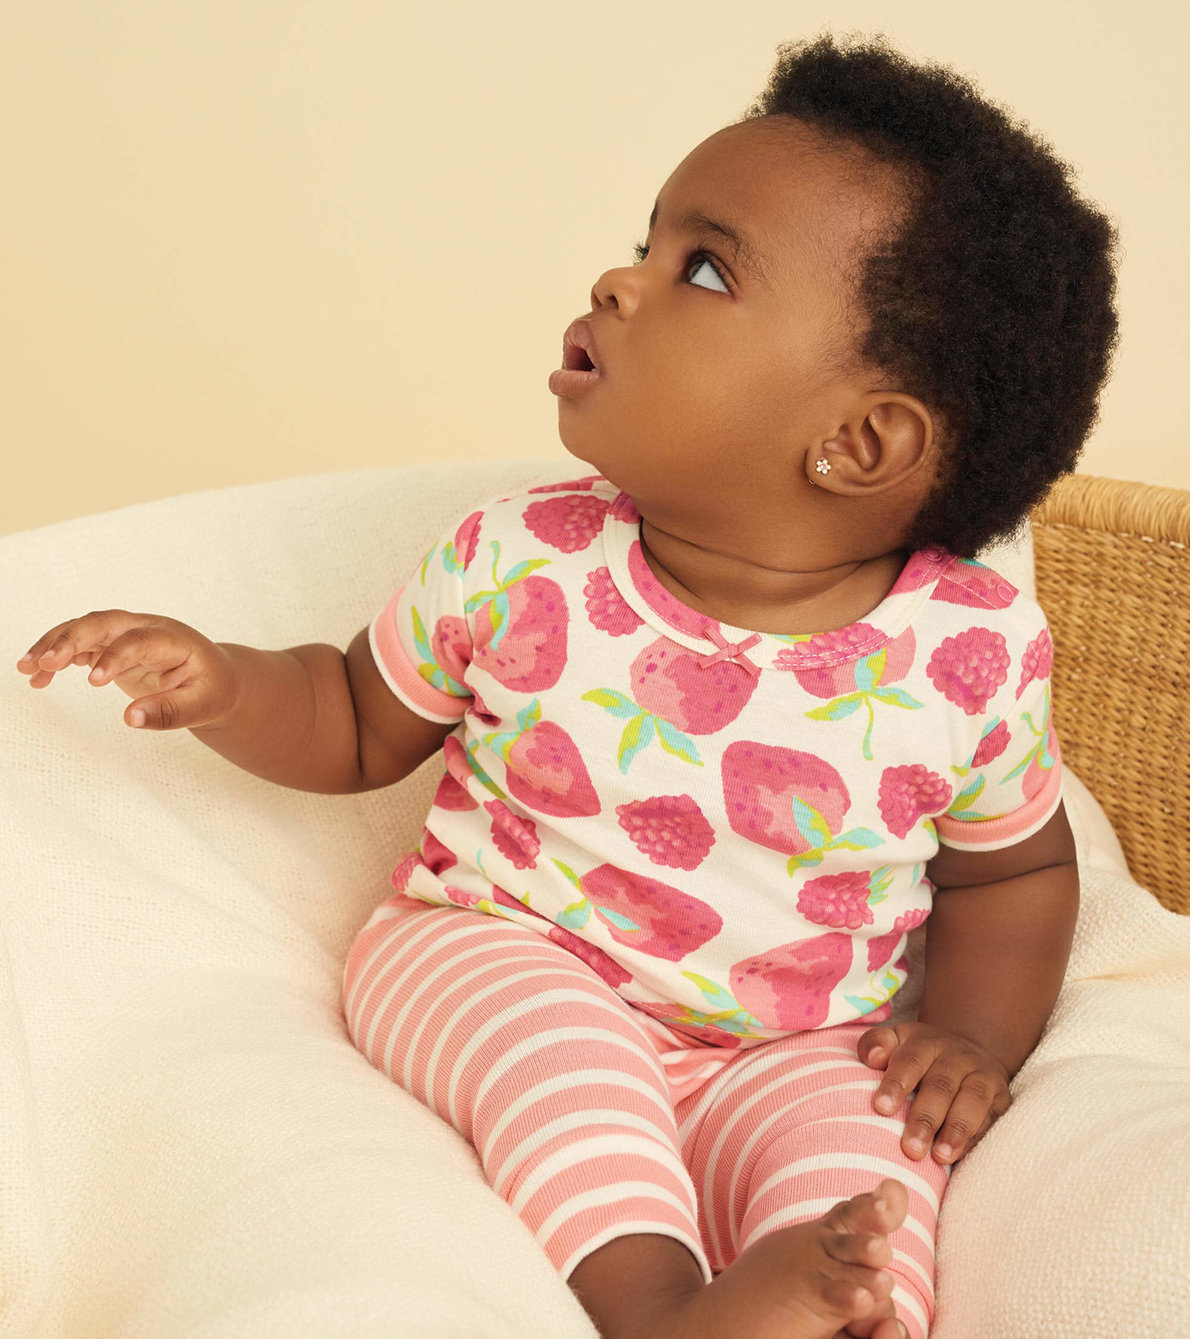 View larger image of Delicious Berries Baby Short Sleeve Pajama Set